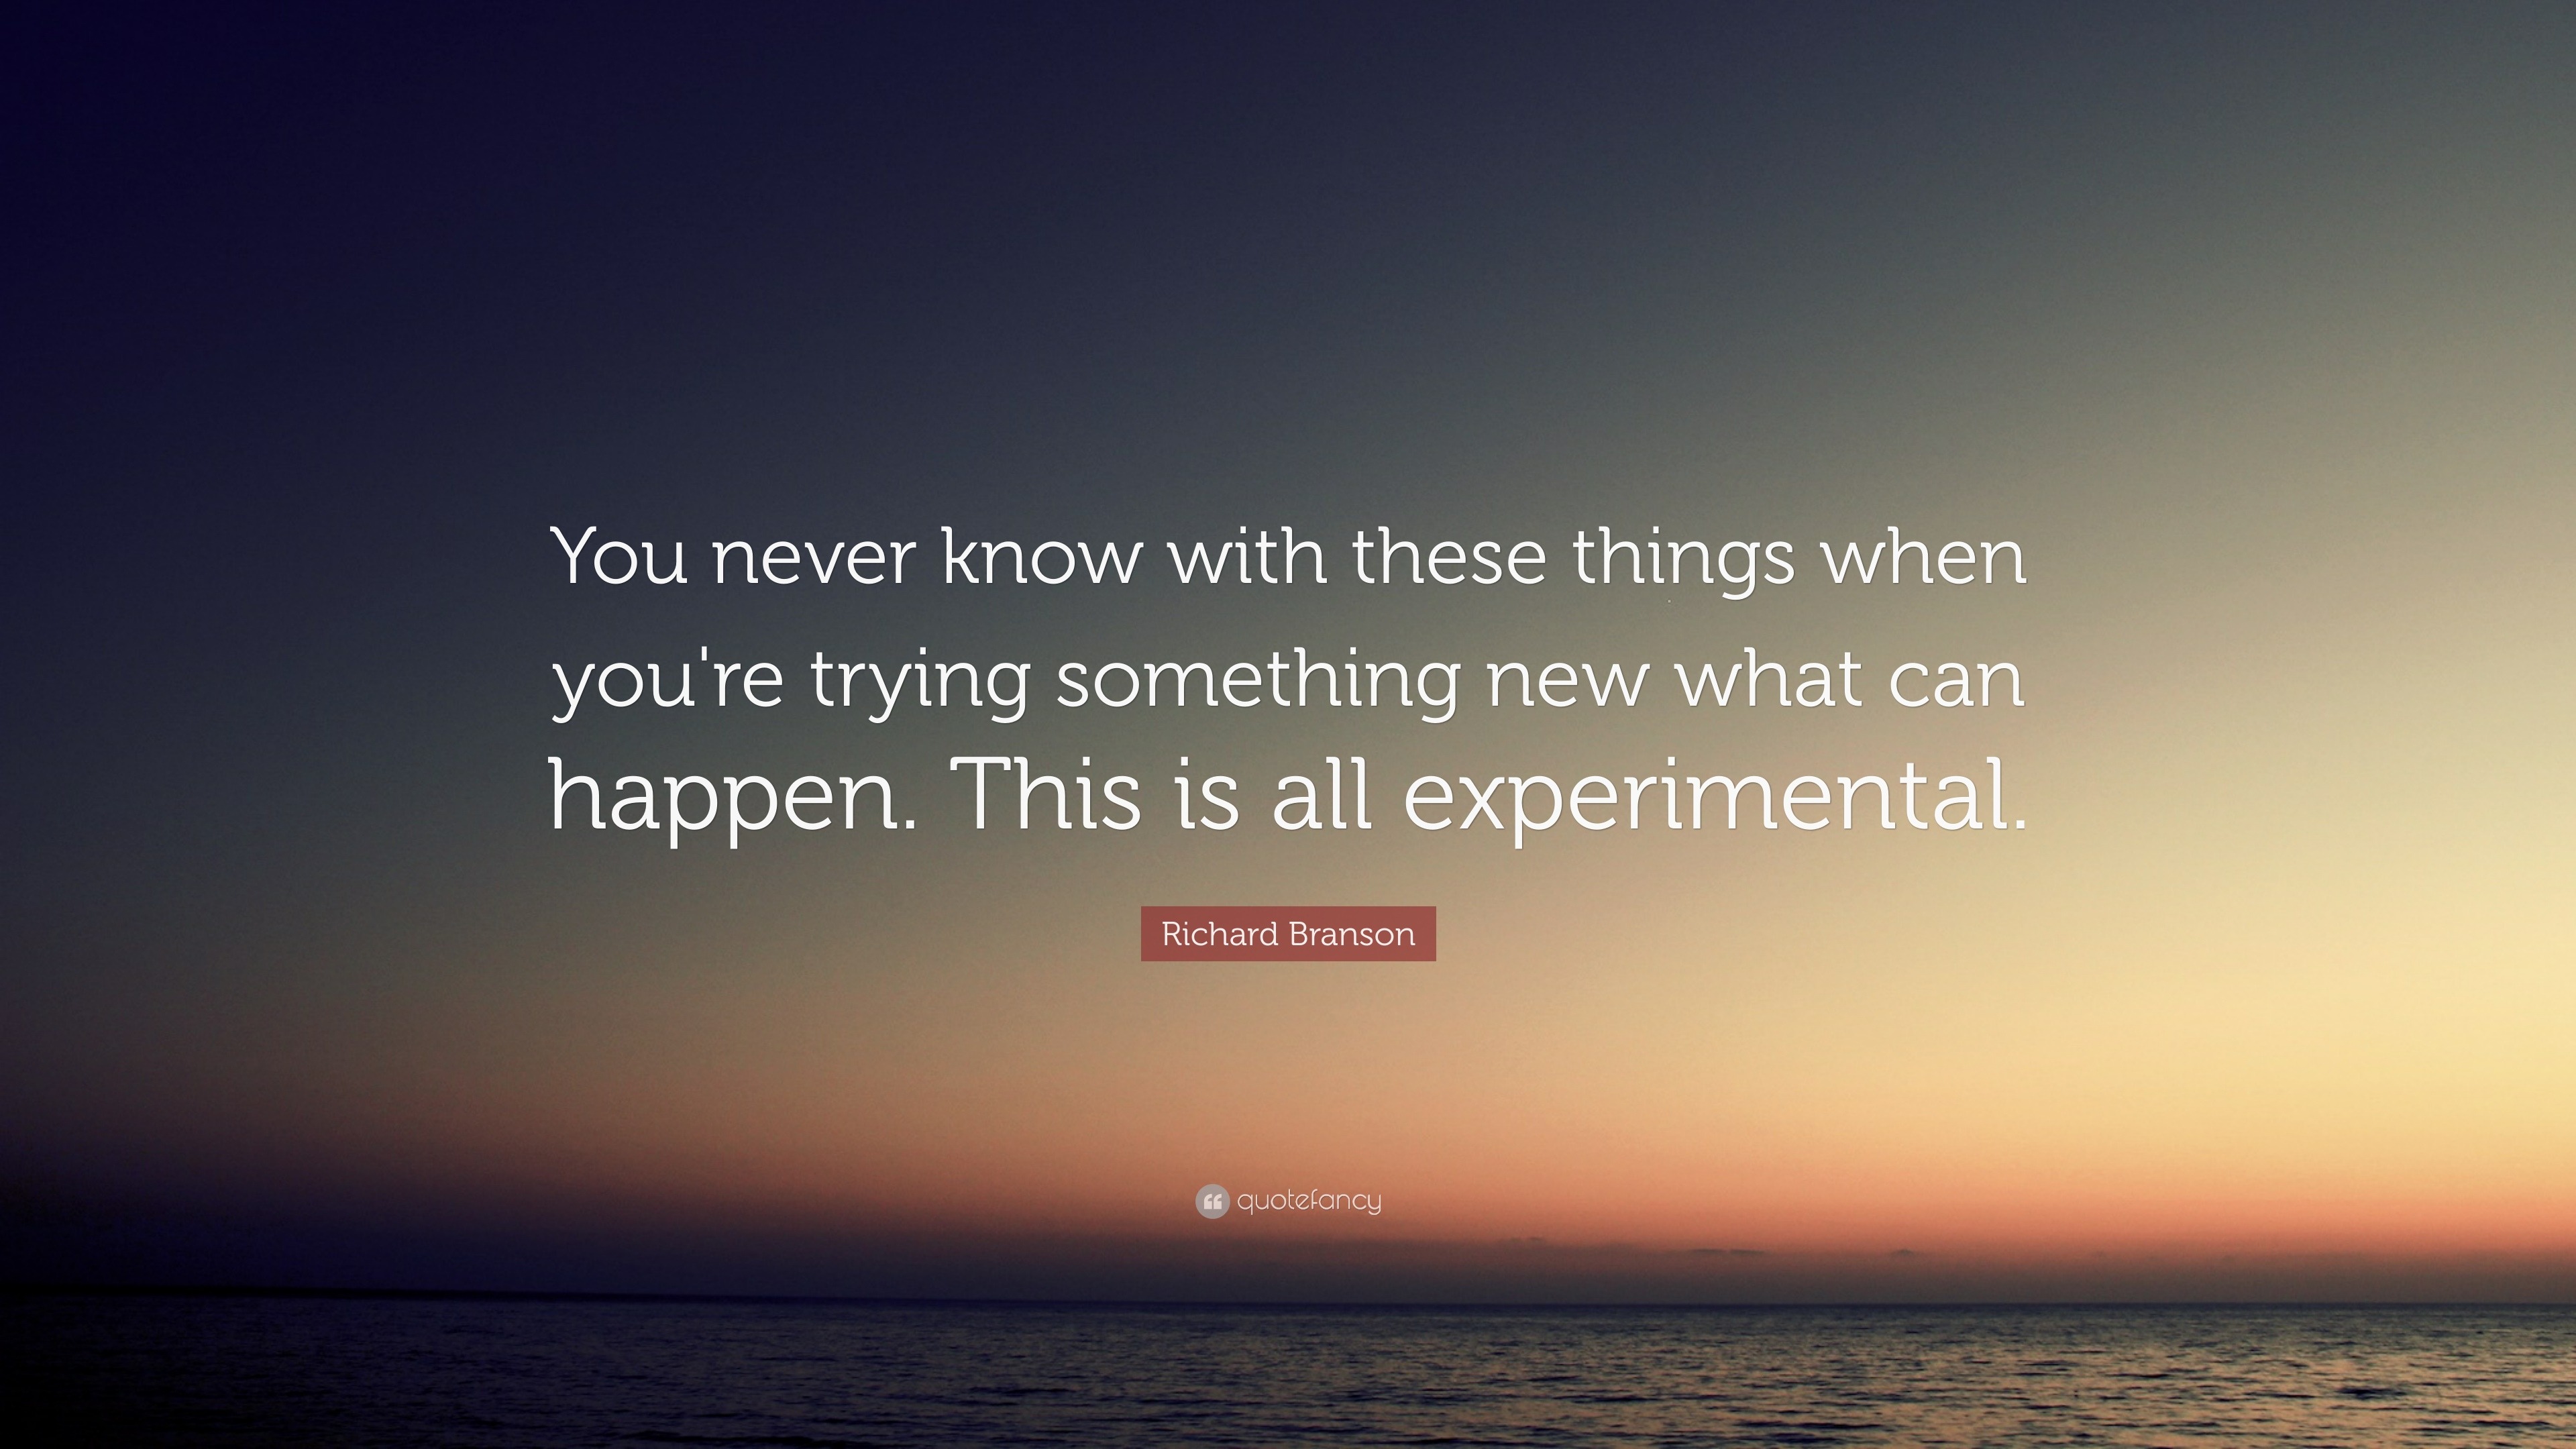 Richard Branson Quote: “You never know with these things when you're ...